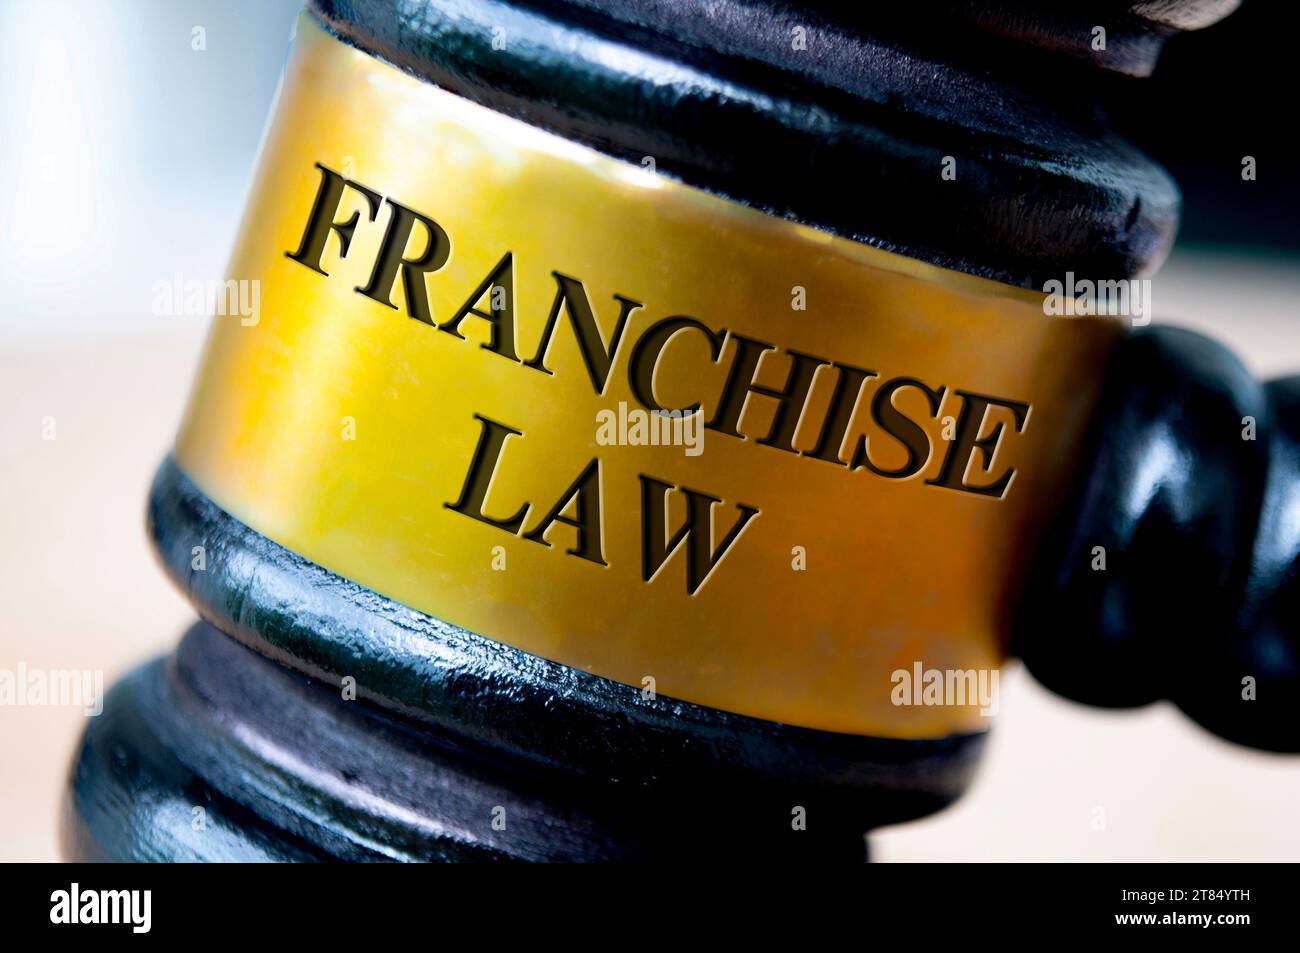 Franchise law text engraved on gavel. Franchise law and legal concept Stock Photo